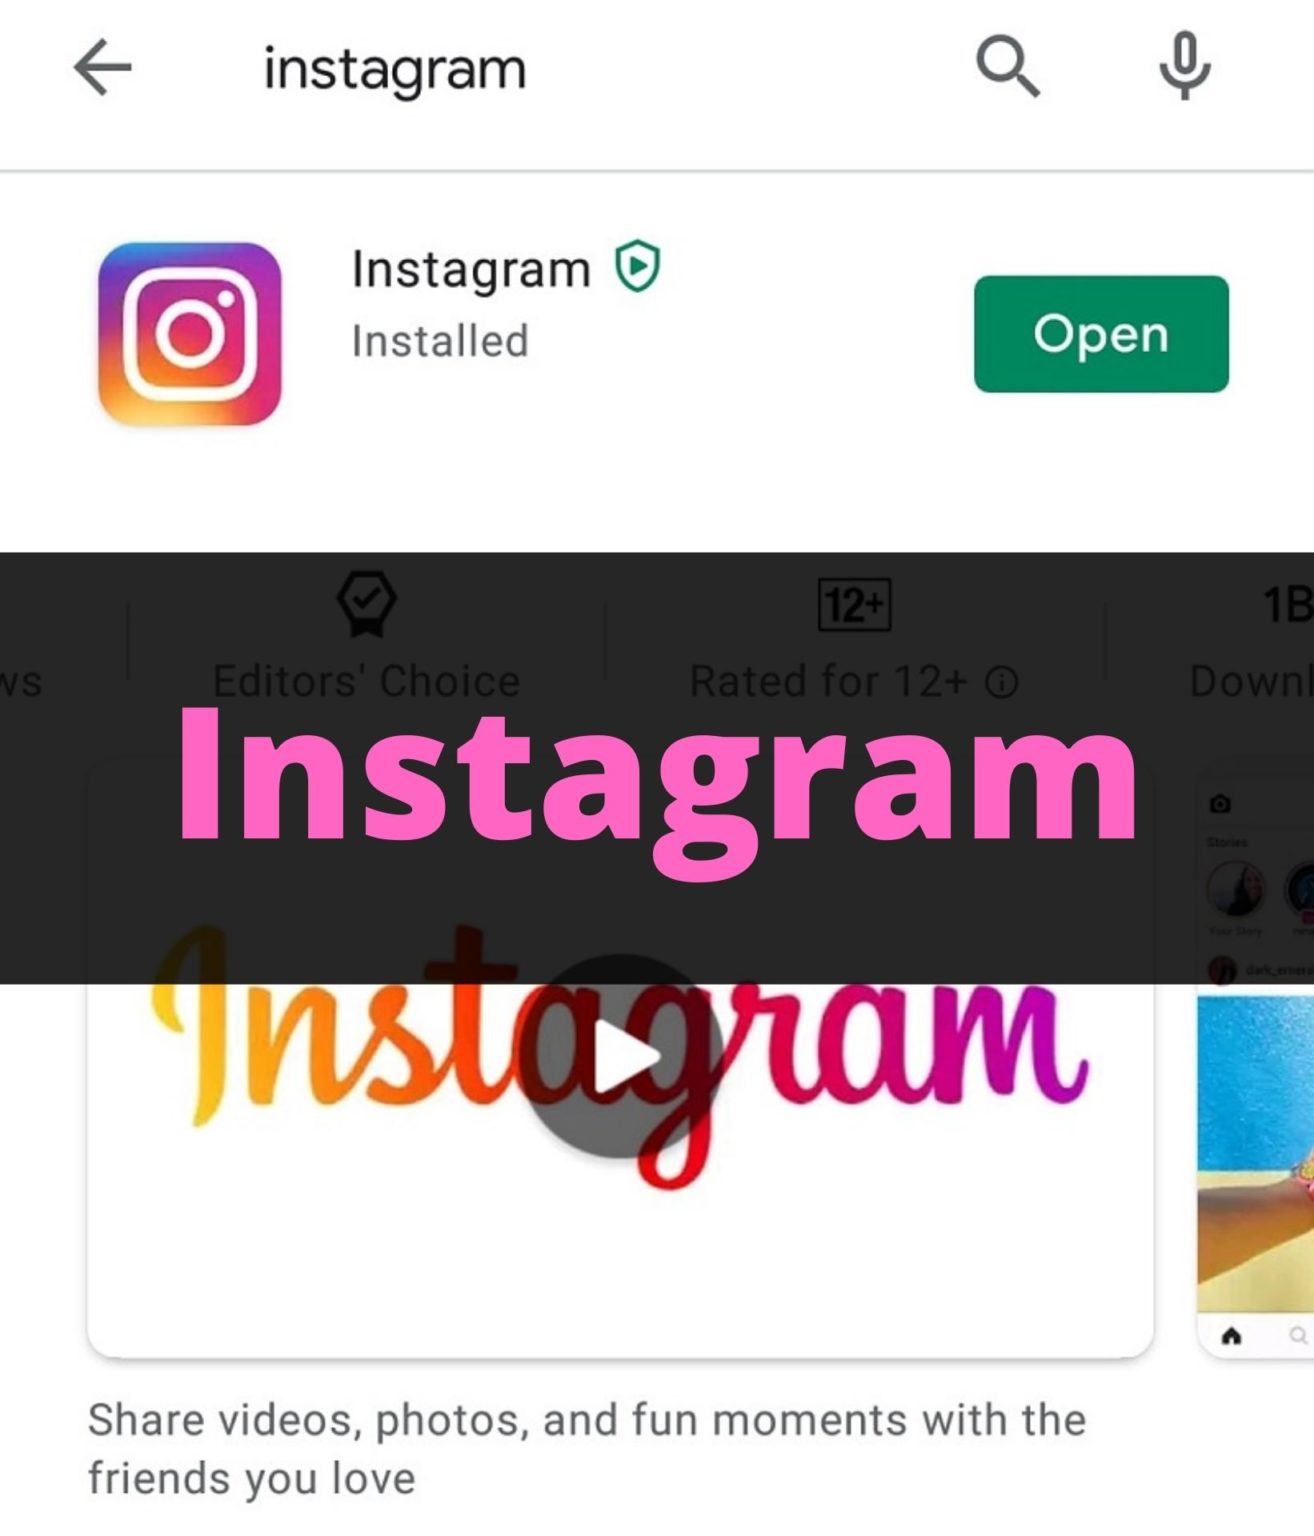 How to Send Gift Message on Instagram (Steps with Photos)